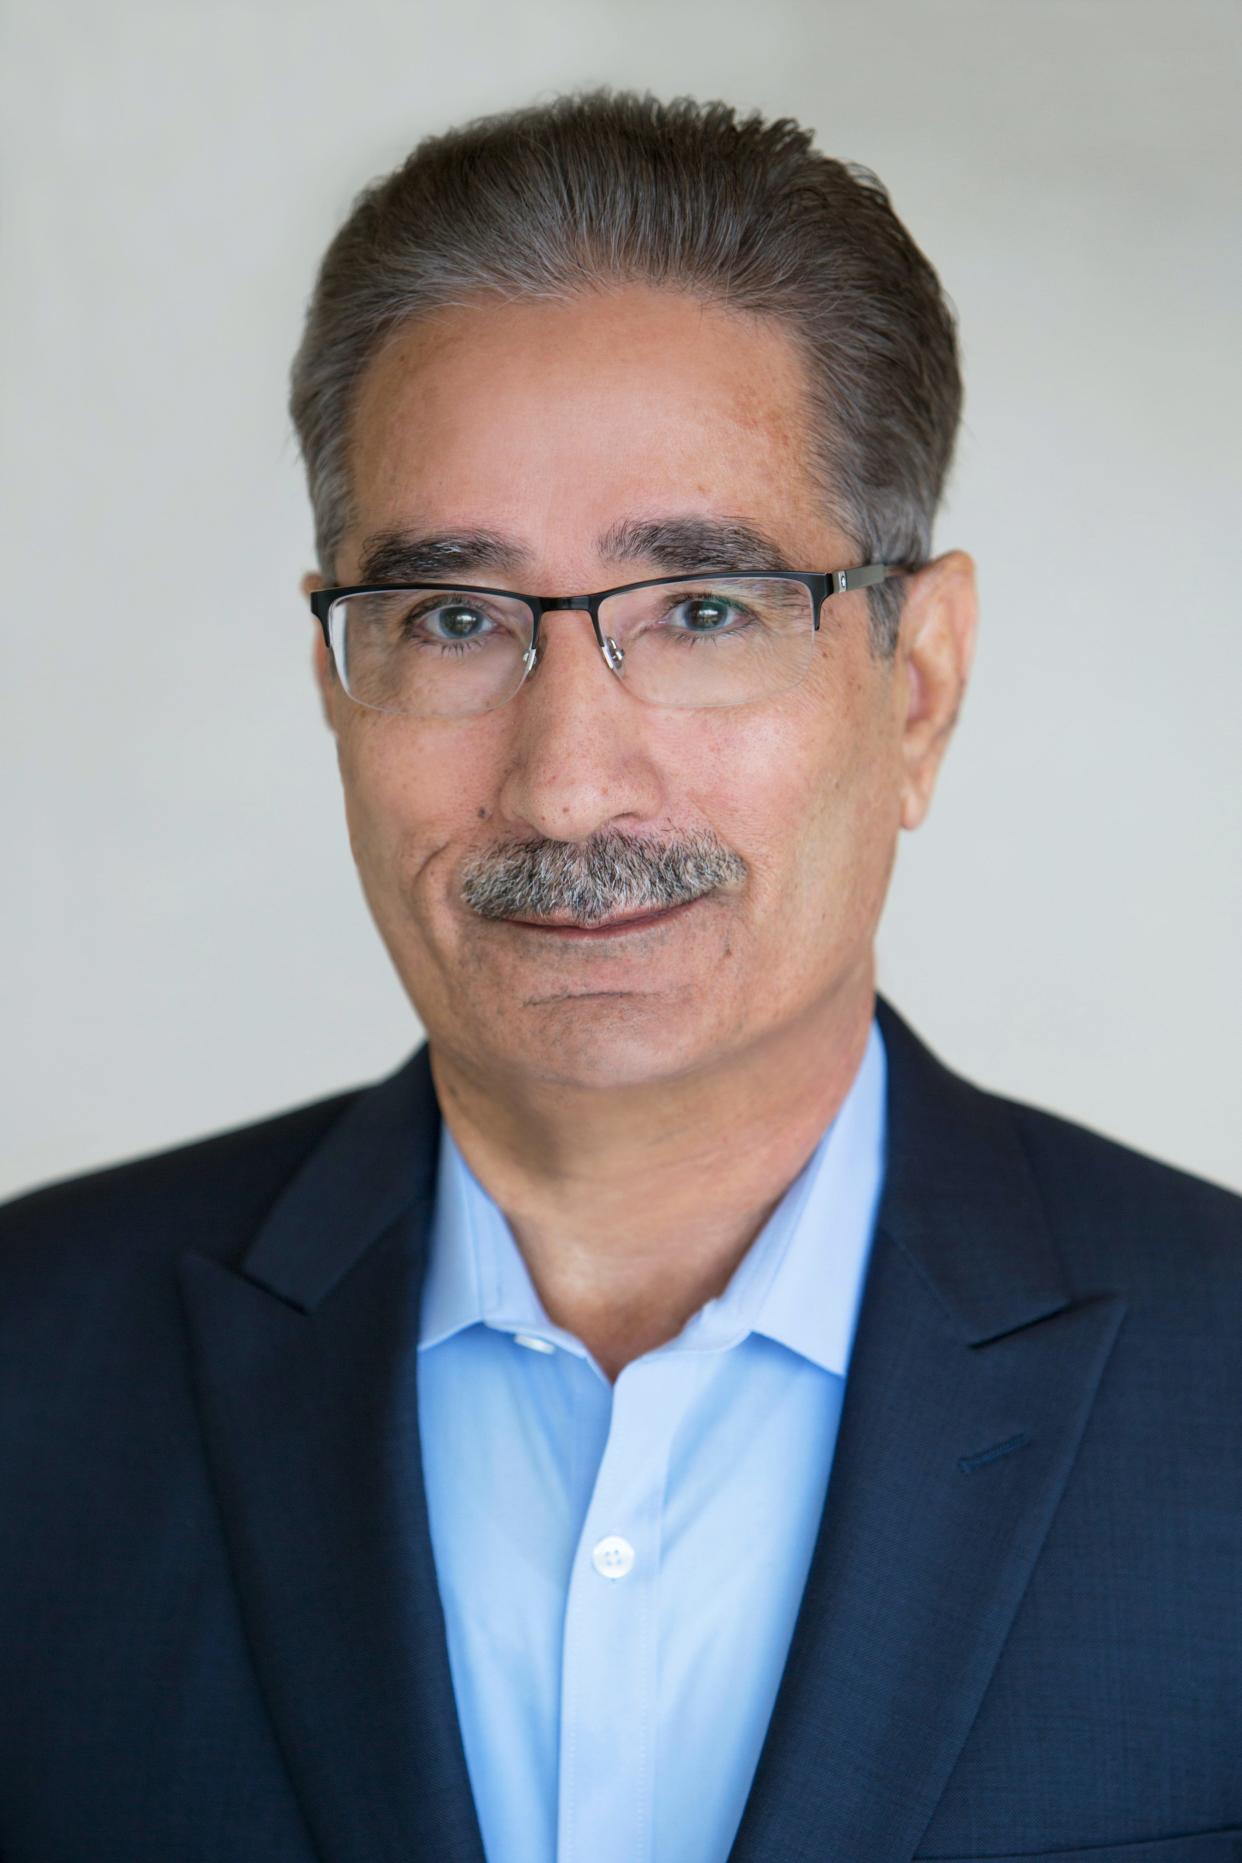 Ajit Giani is a member of the Austin Baha’i Community, and an Interfaith Action of Central Texas board member for where he is board secretary and a member of the executive committee